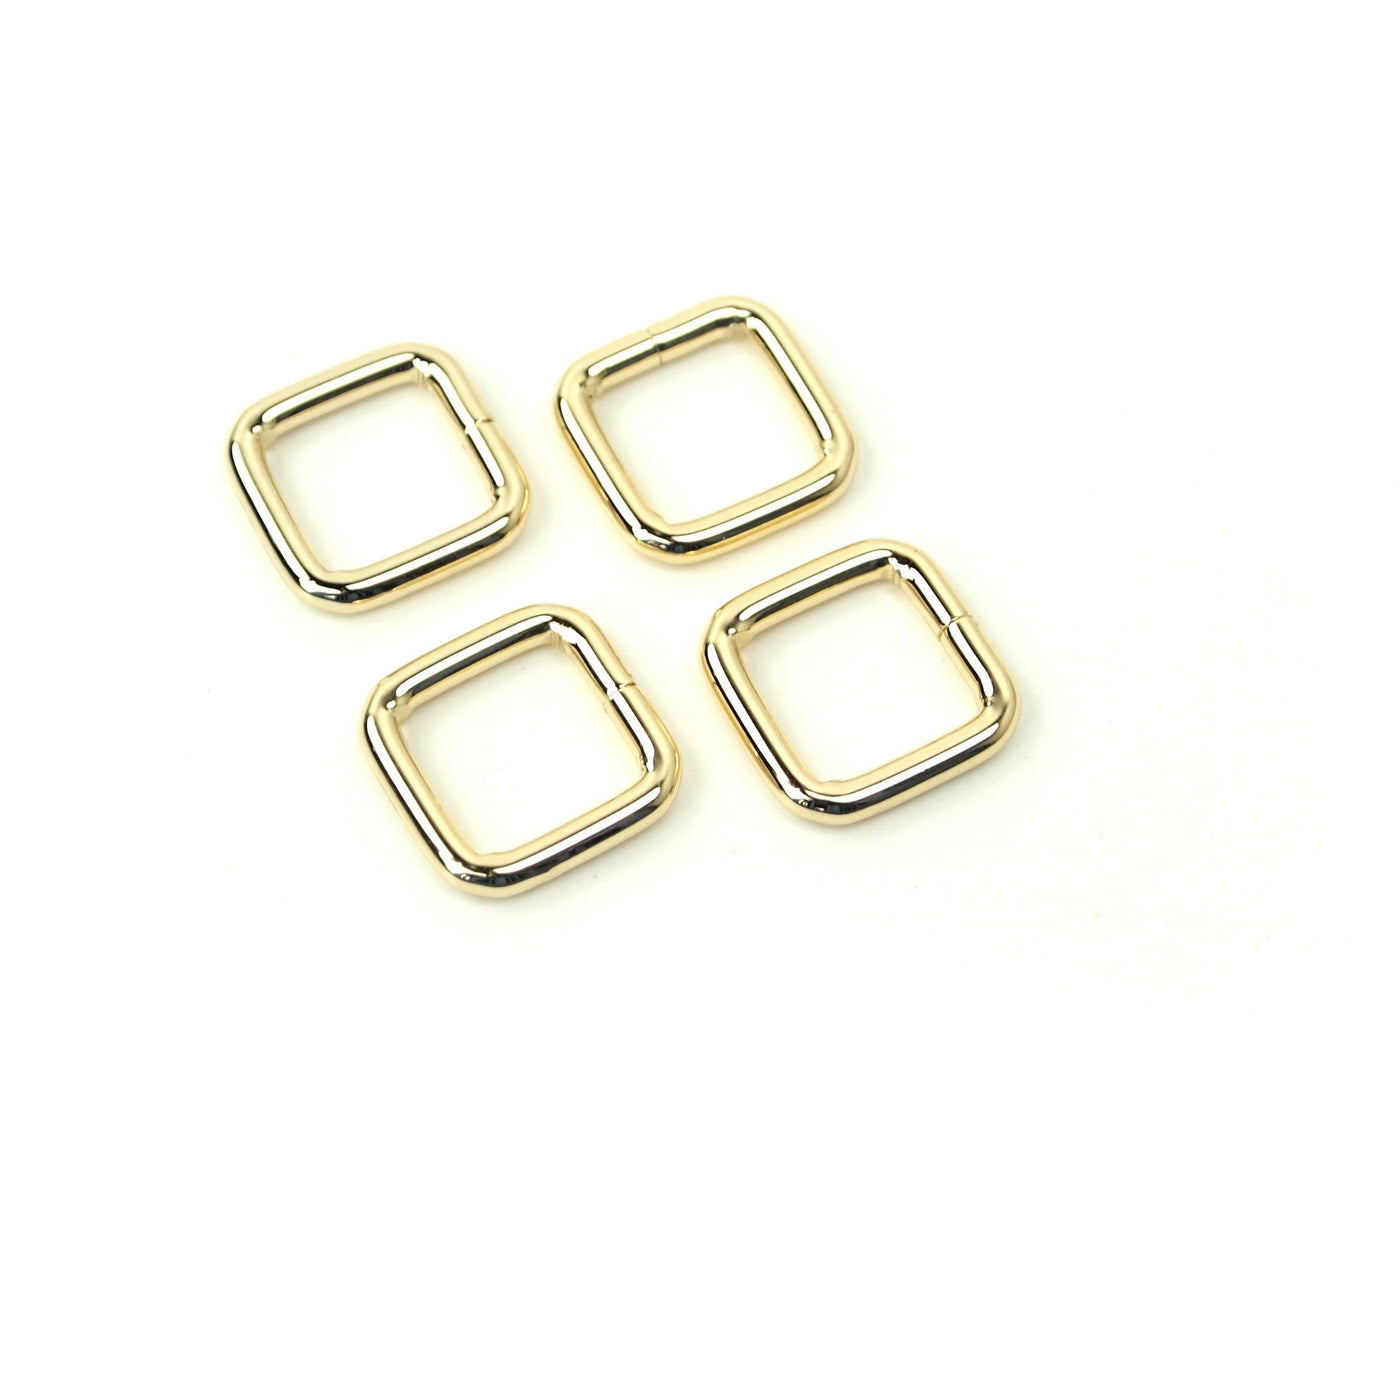 Gold 1/2" Rectangle Rings